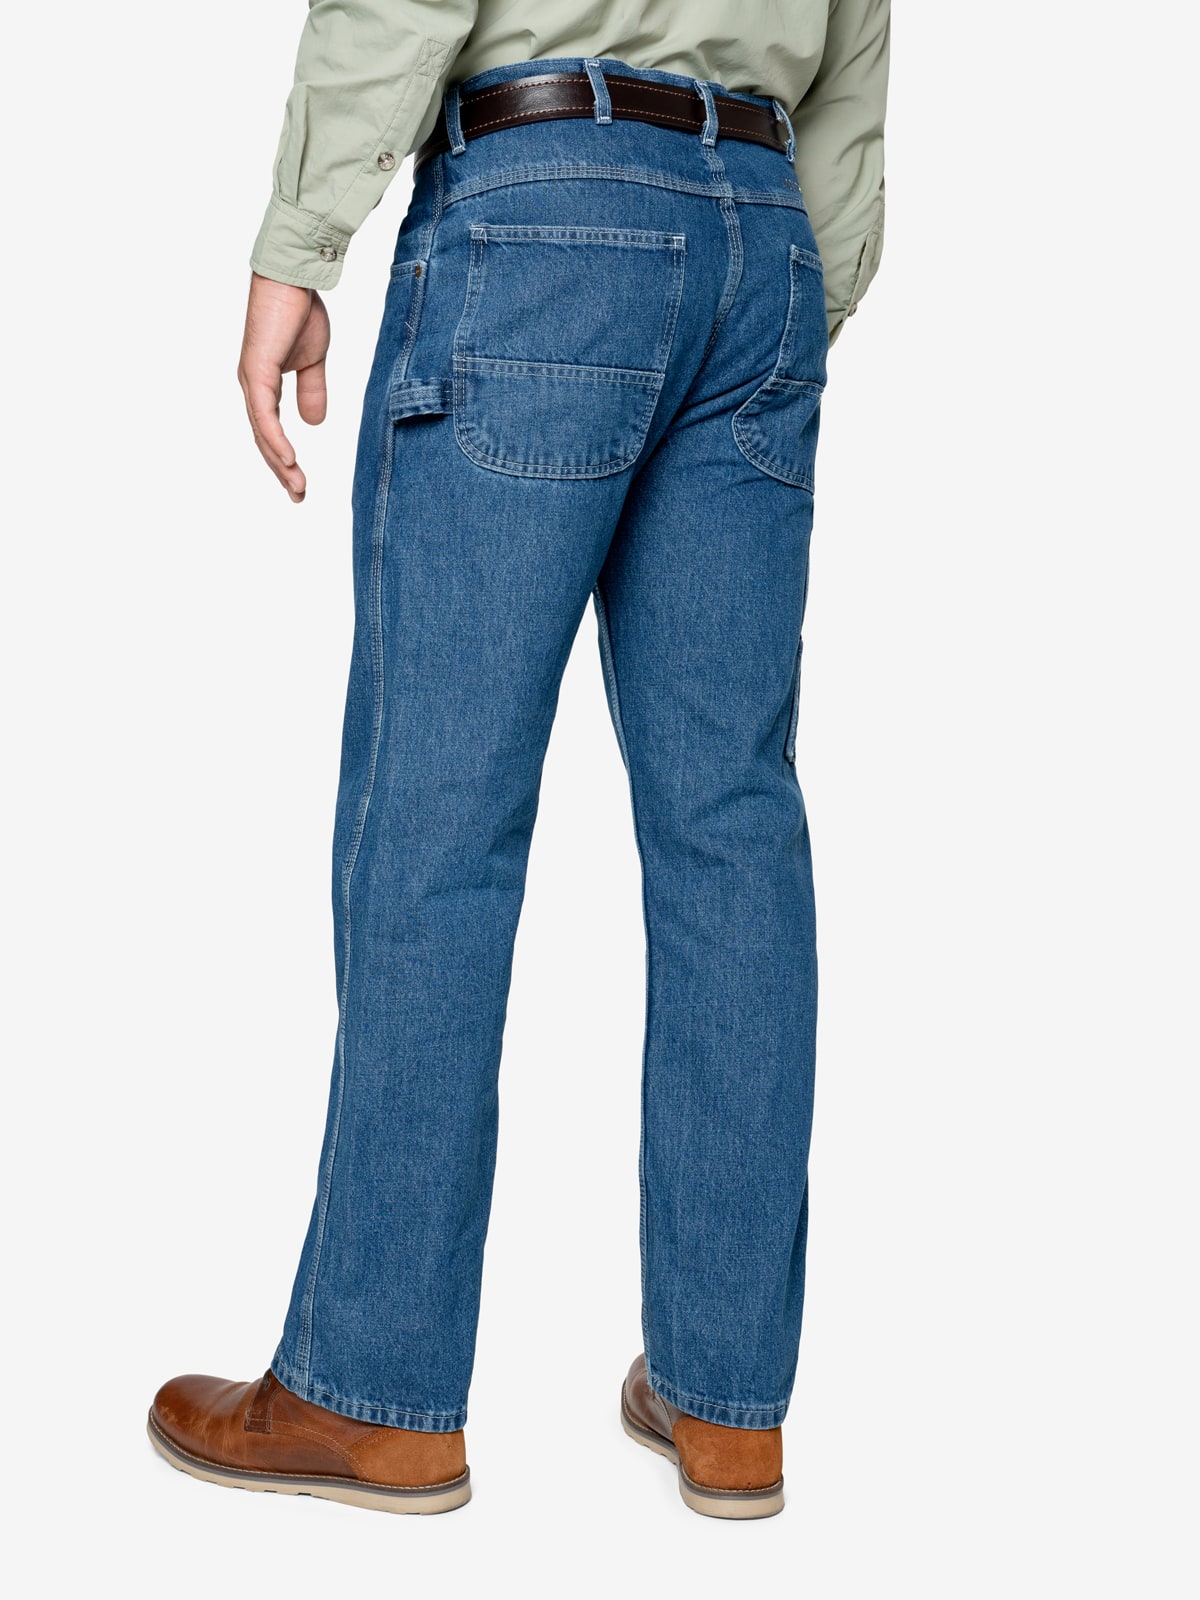 Shield Men's Insect Repellent Jeans | Permethrin-Treated